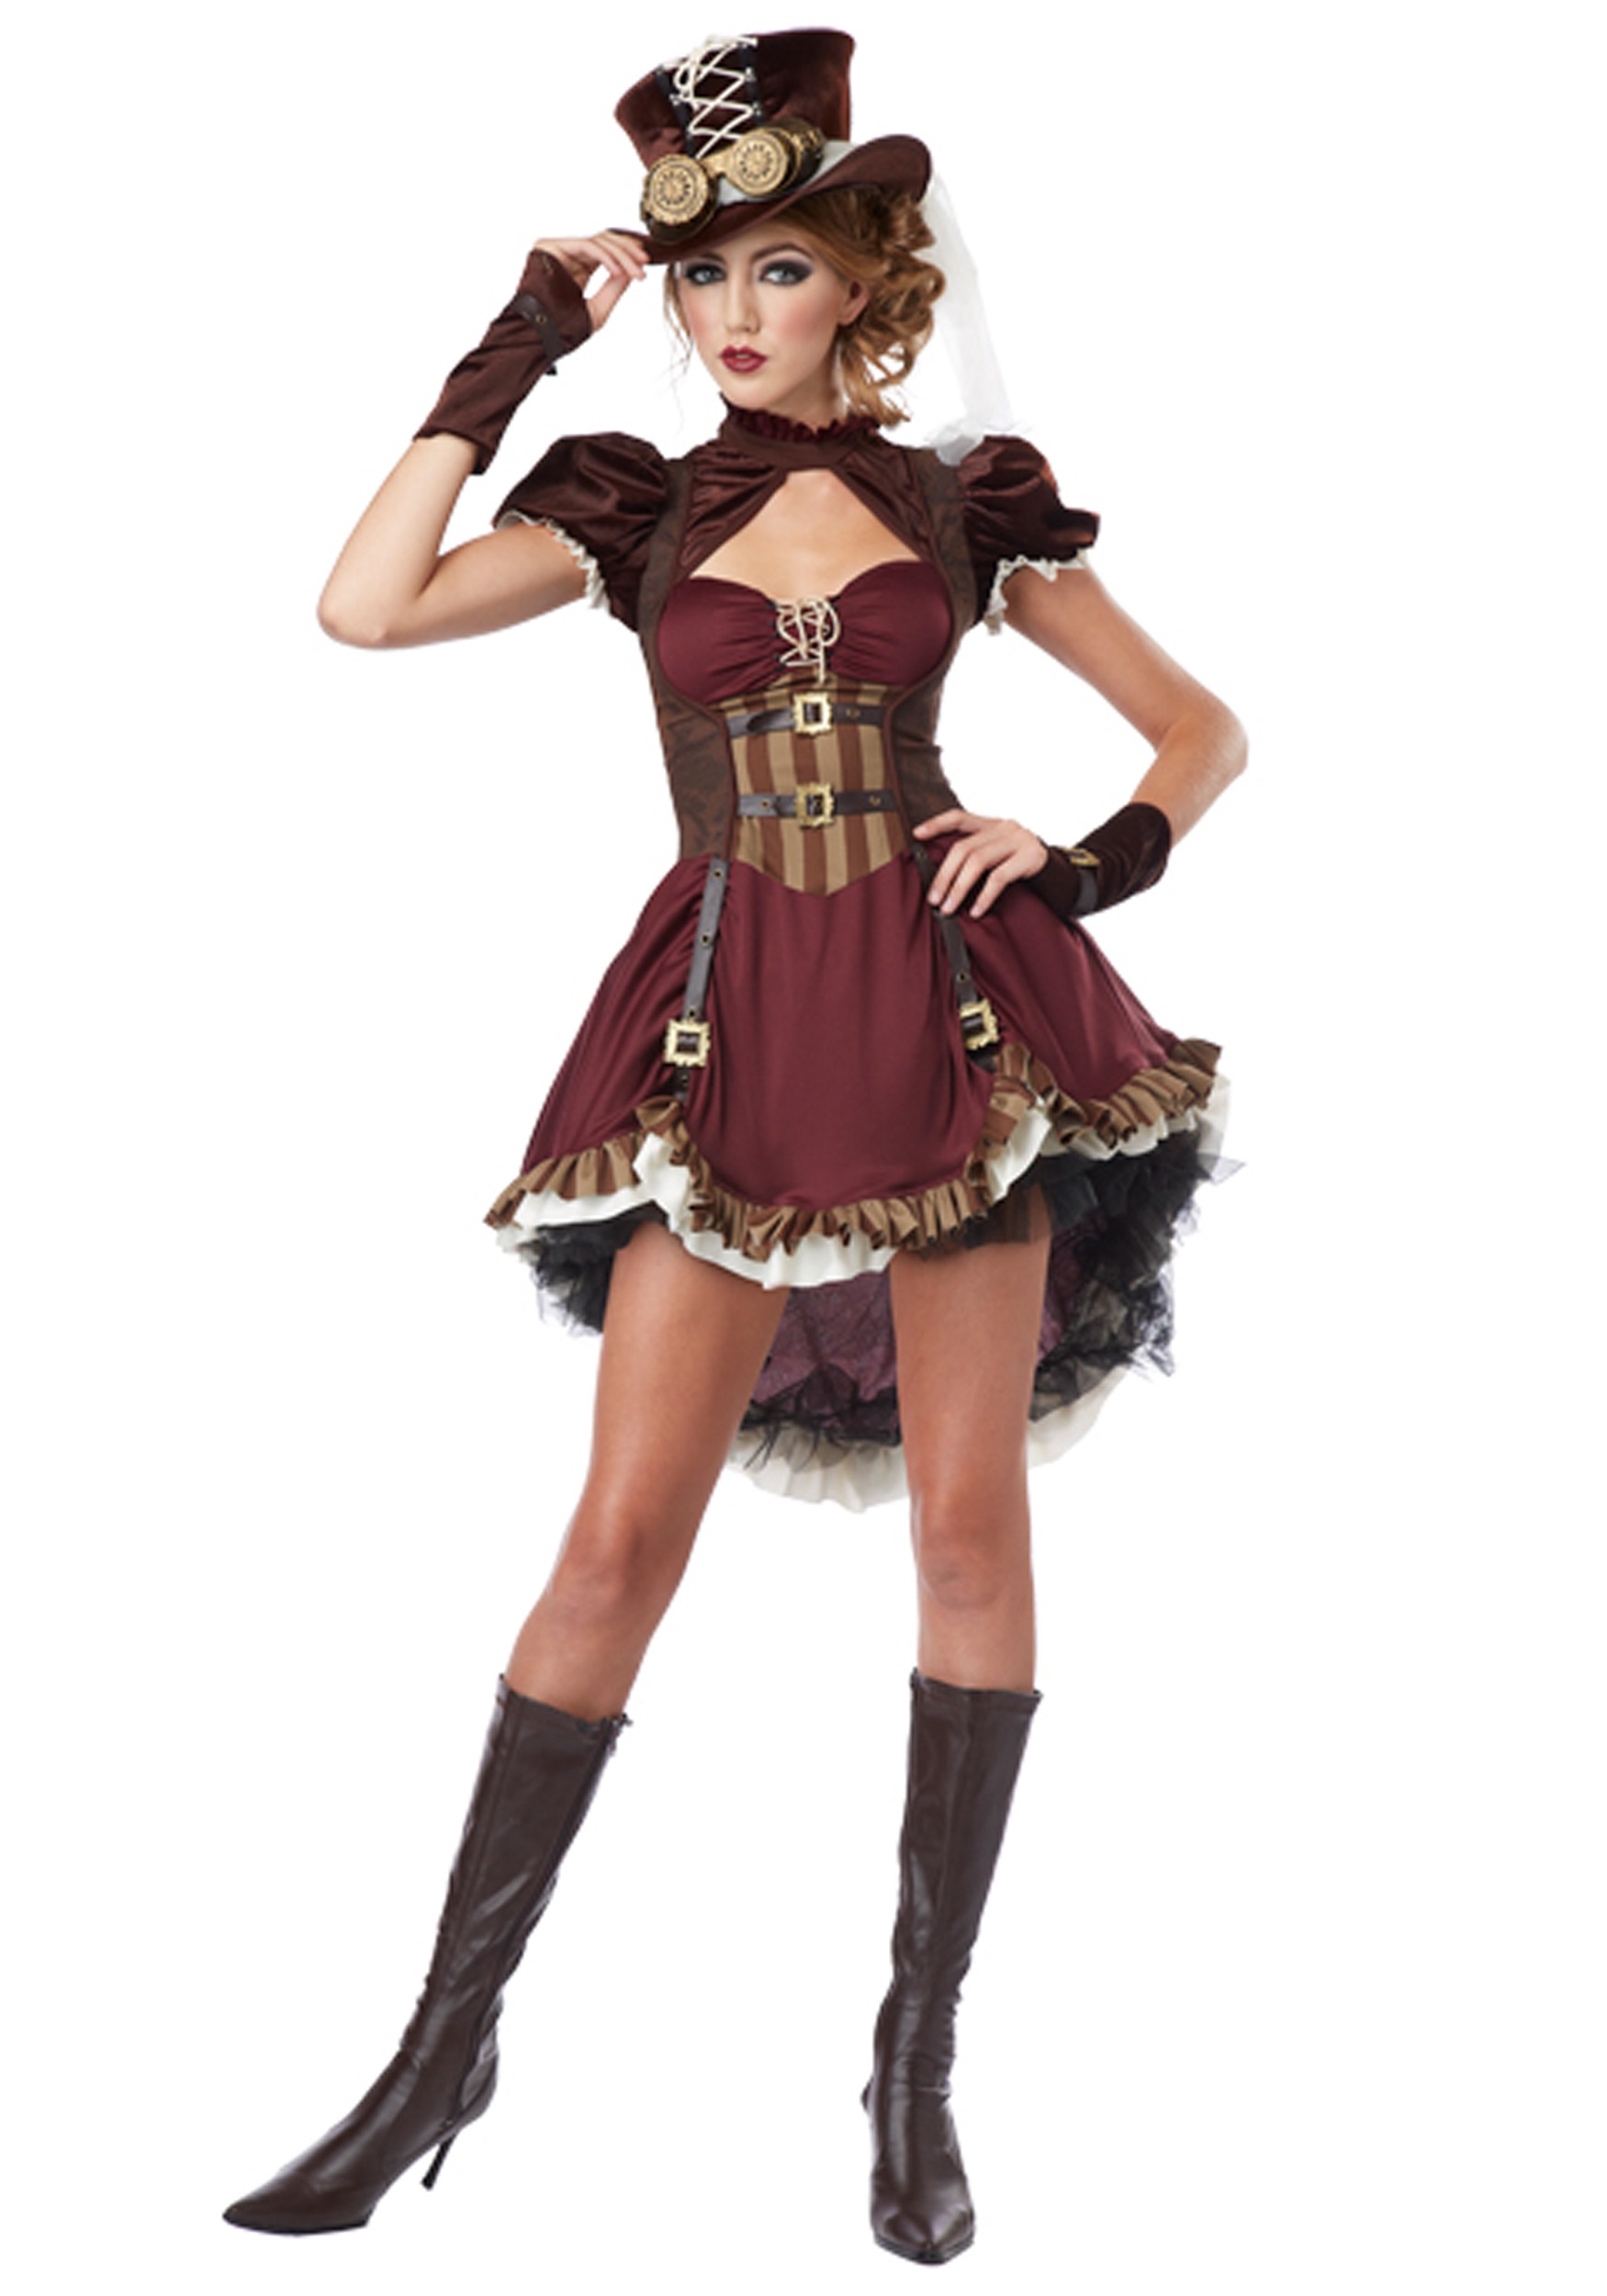 https://images.halloweencostumes.ca/products/15427/1-1/adult-steampunk-lady-costume.jpg